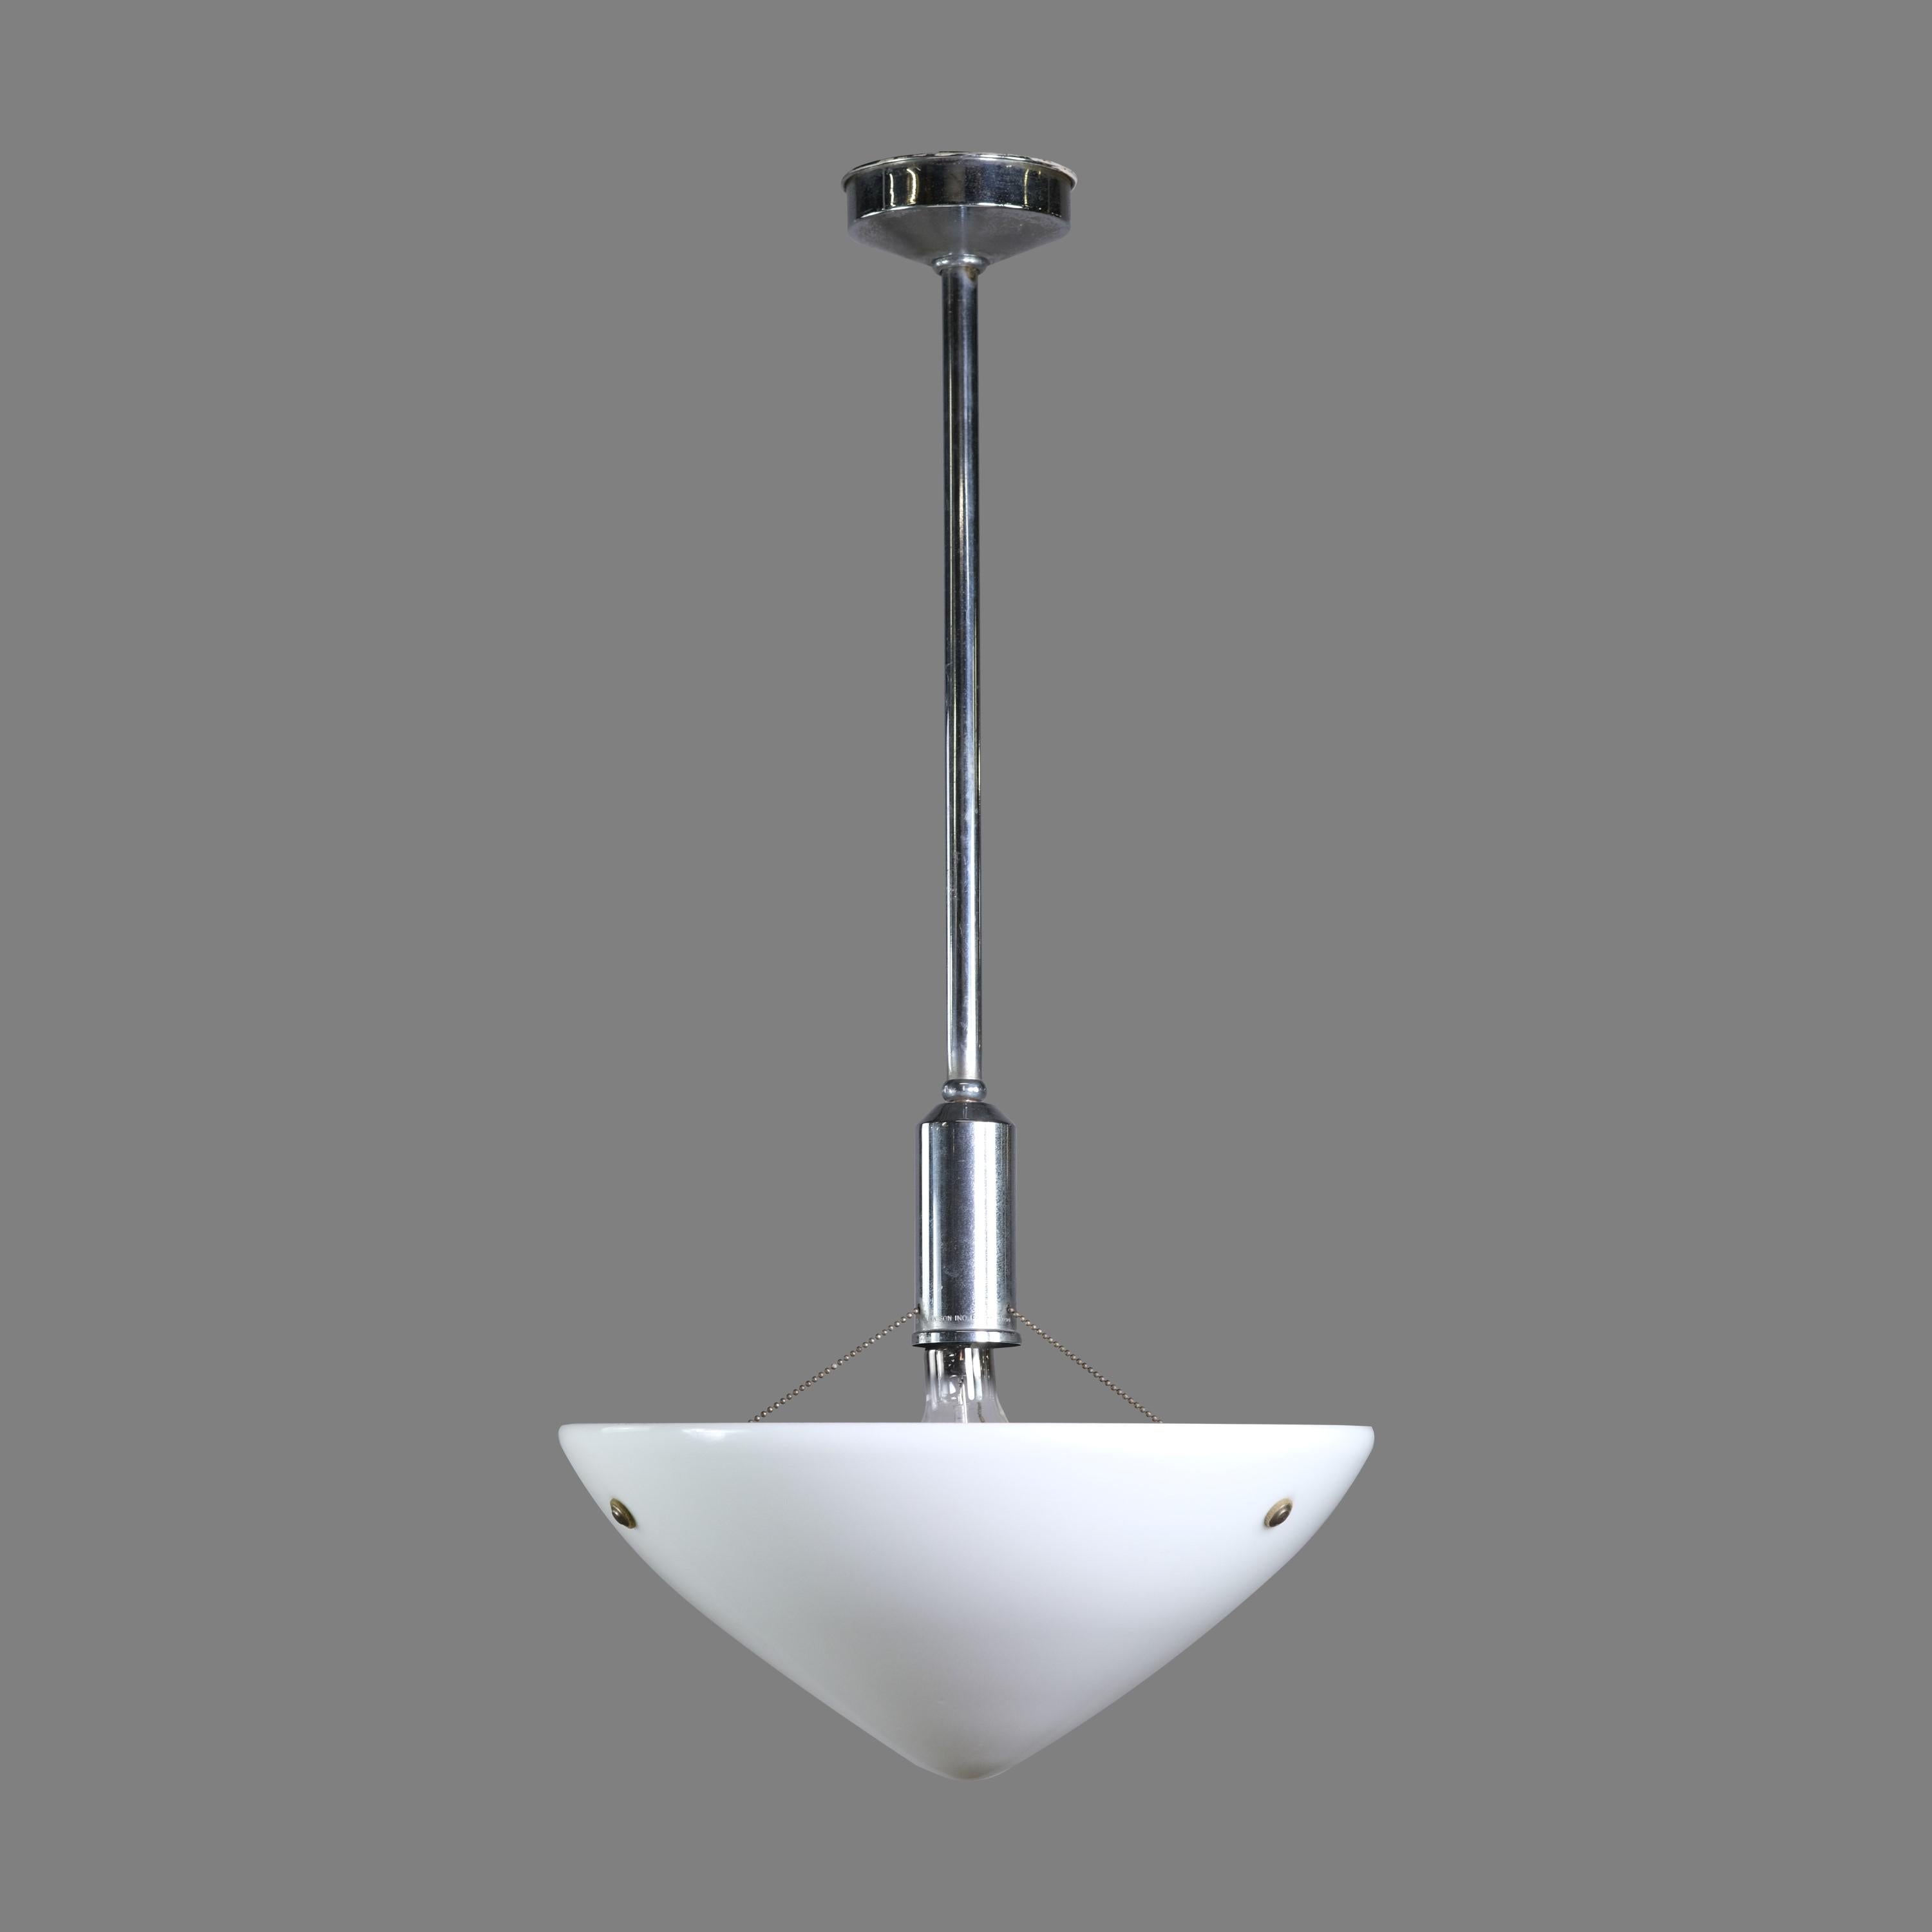 Mid-Century Modern pendant light. Features a white cone shaped glass shade attached to the chrome plated steel frame via three beaded chains. Cleaned and restored. This can be seen at our 400 Gilligan St location in Scranton, PA.